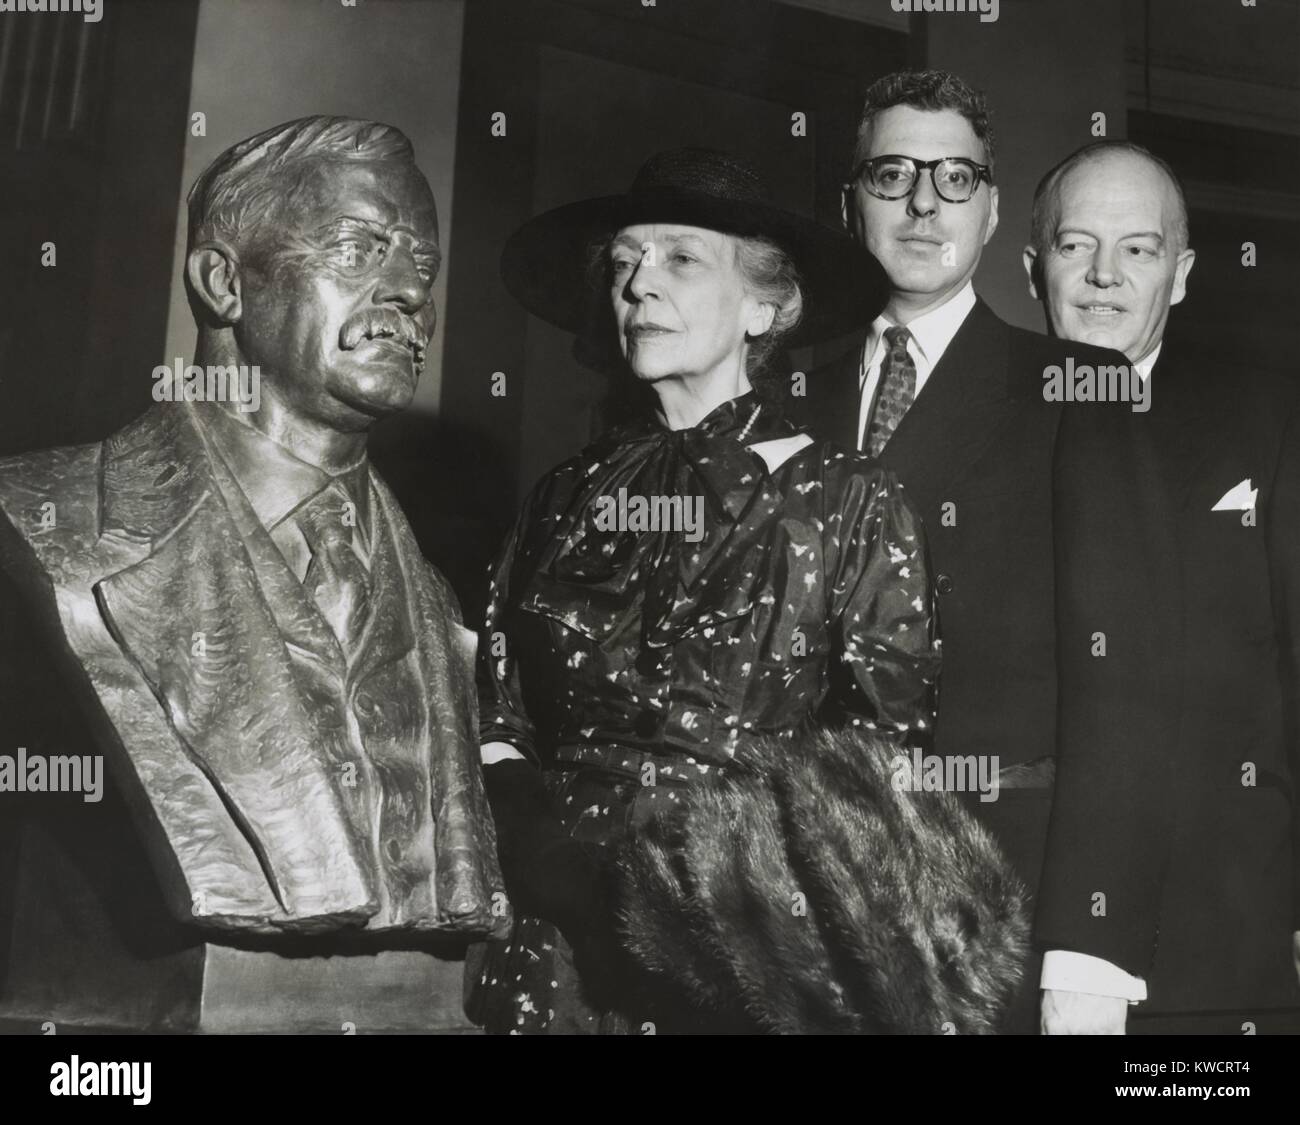 Remembrance as Theodore Roosevelt's bust is unveiled. Alice Roosevelt Longworth, Oscar Straus of the Theodore Roosevelt Association, and Harold Stassen, with the sculpture by Georg John Lober. In was installed in the Hall of Fame for Great Americans in the Gould Library at New York University. 1954. - (BSLOC 2015 1 54) Stock Photo